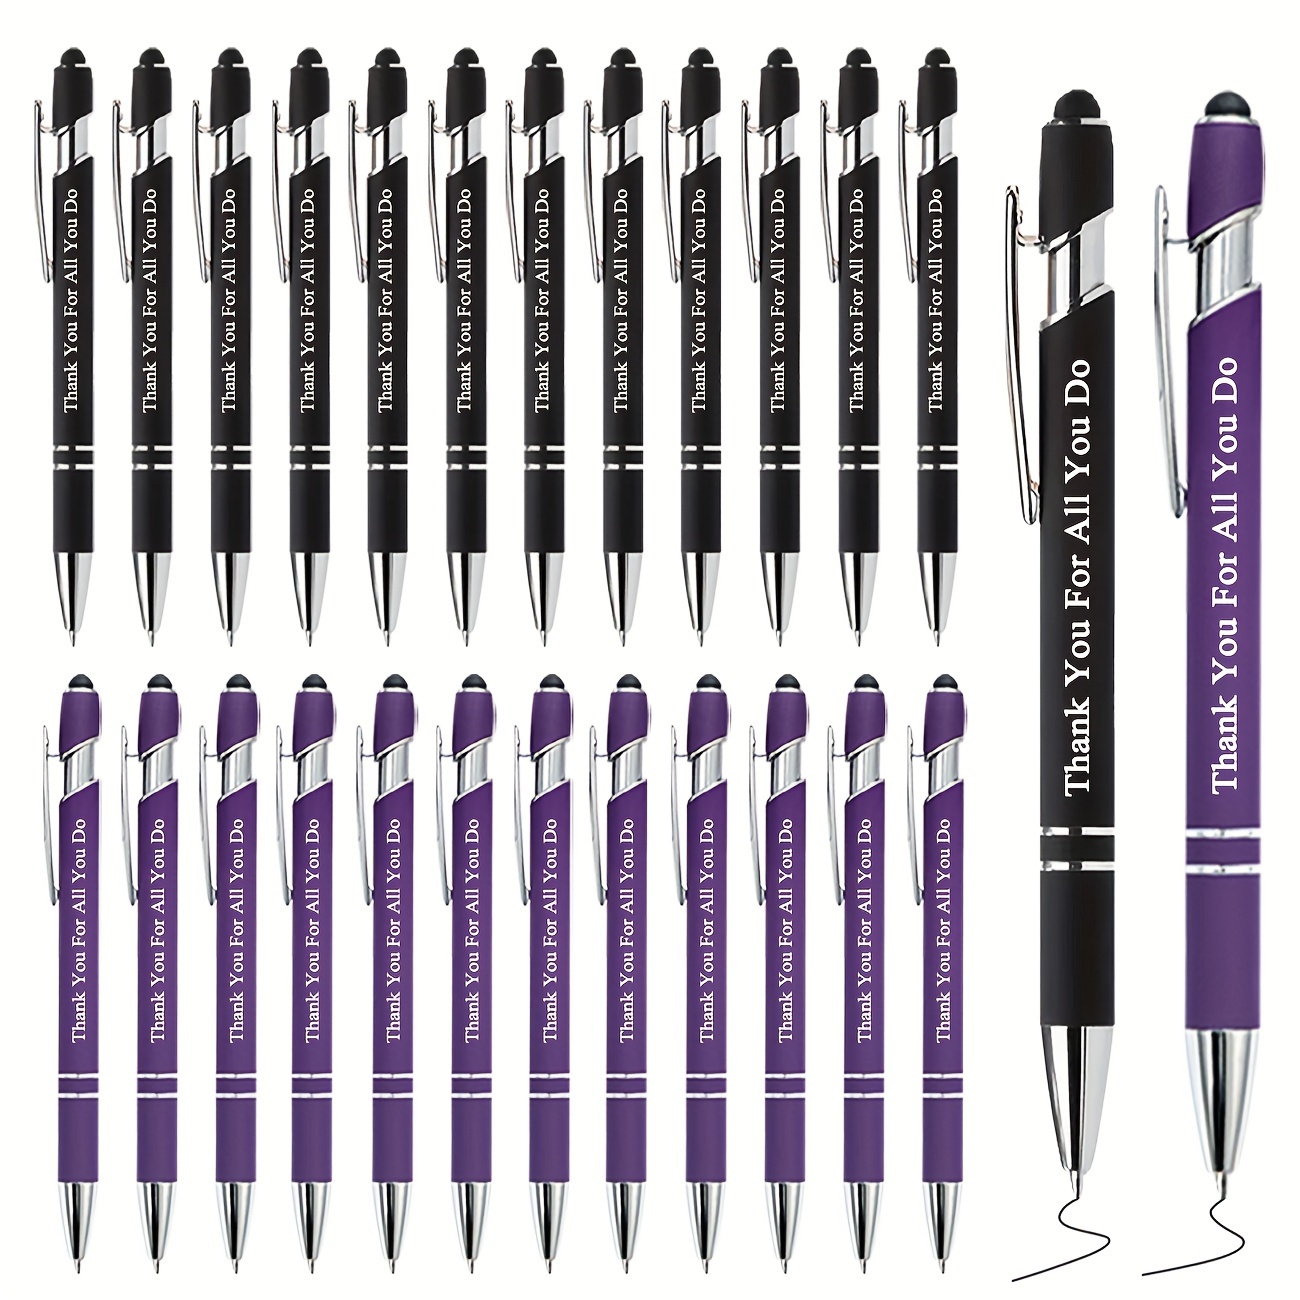 

24pcs Business Black&cute Purple Ballpoint Pen With Stylus Tip. Employee Appreciation Pen. Each Pen Says "thank You For All You Do" + Touch Screen Compatibility, Ideal Gift For Employees(black Ink)